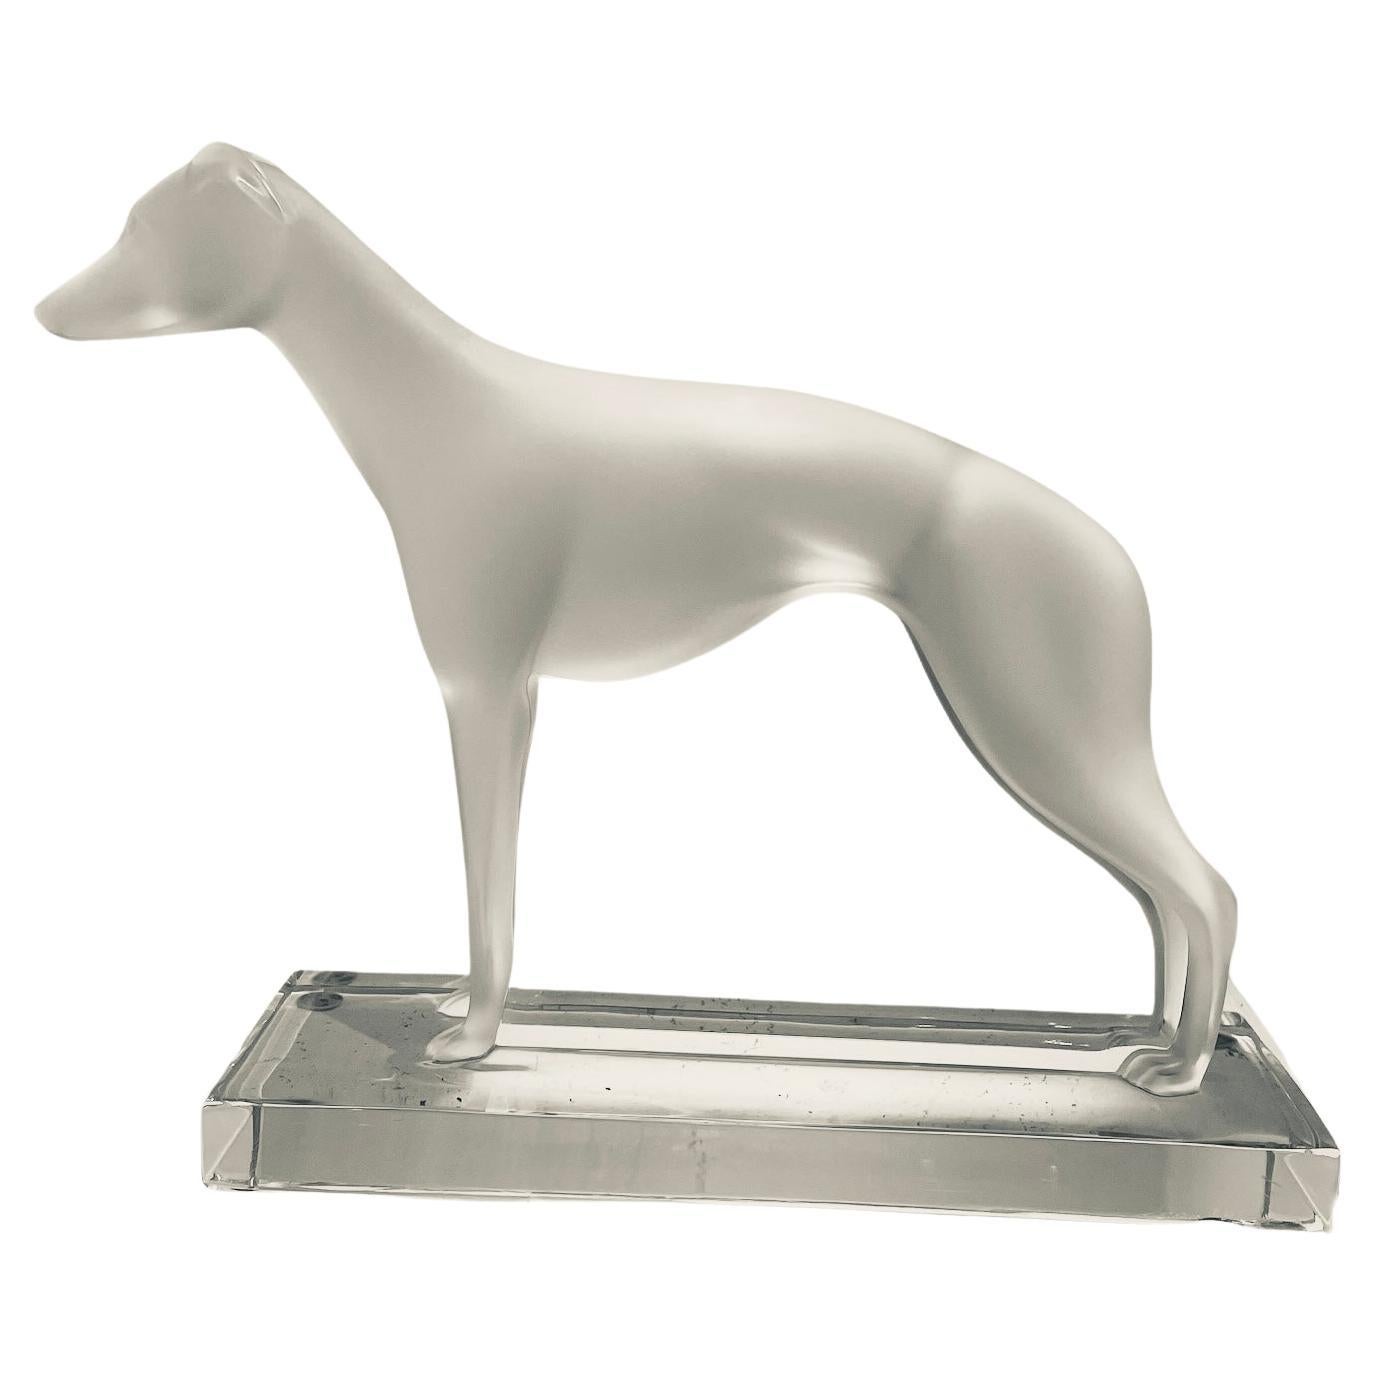 Lalique France Frosted Crystal “Perceval” Greyhound Sculpture 